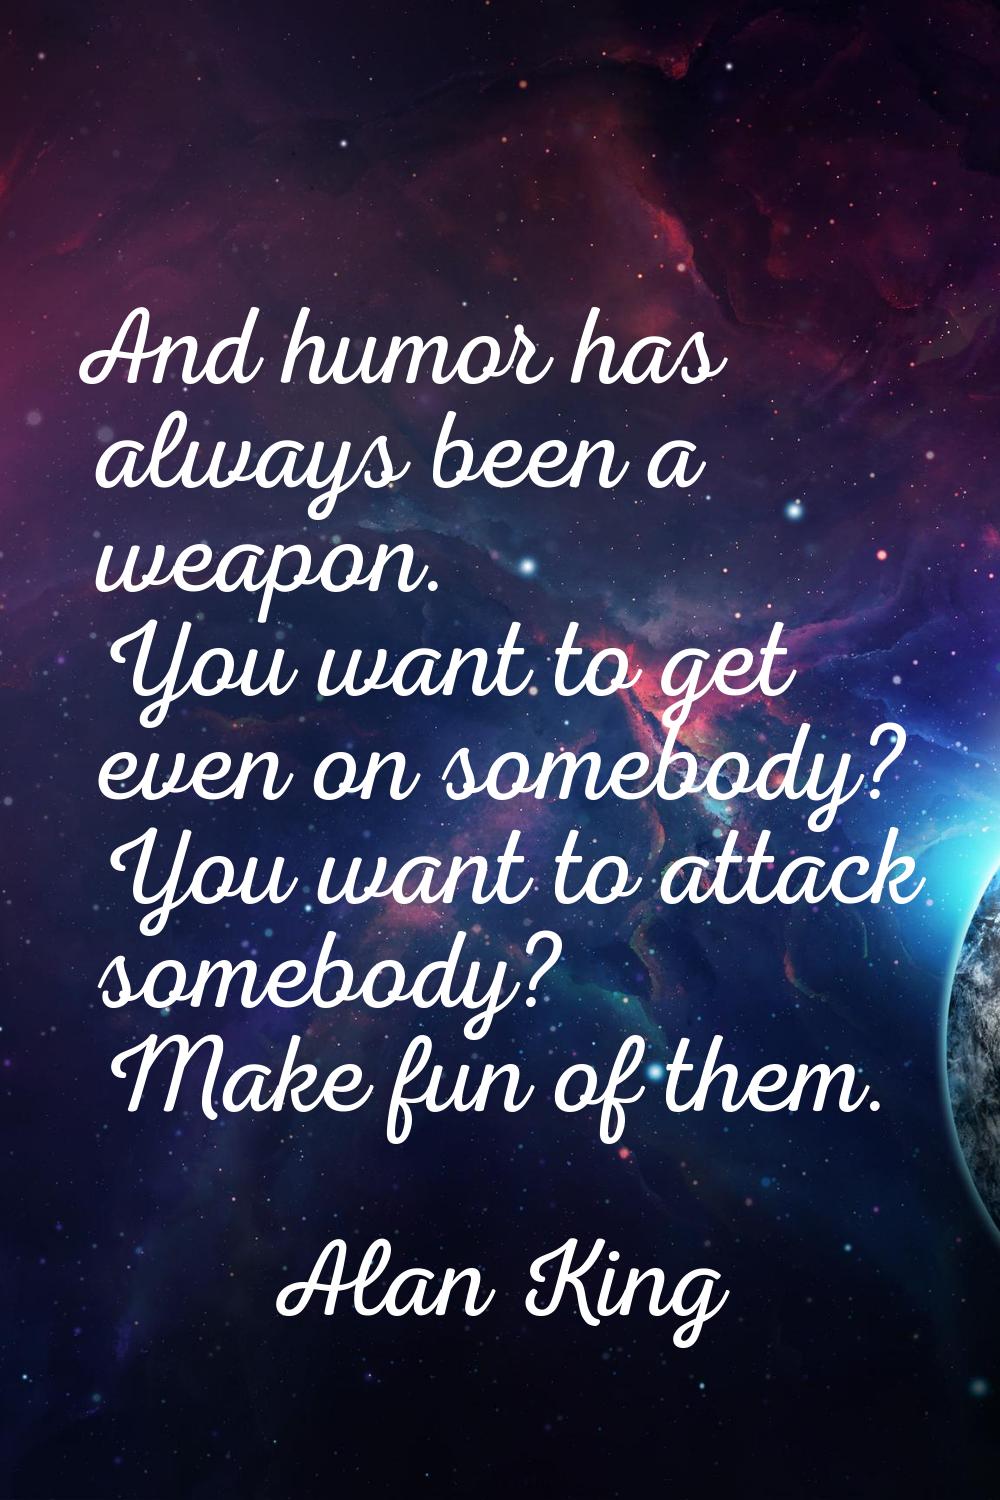 And humor has always been a weapon. You want to get even on somebody? You want to attack somebody? 